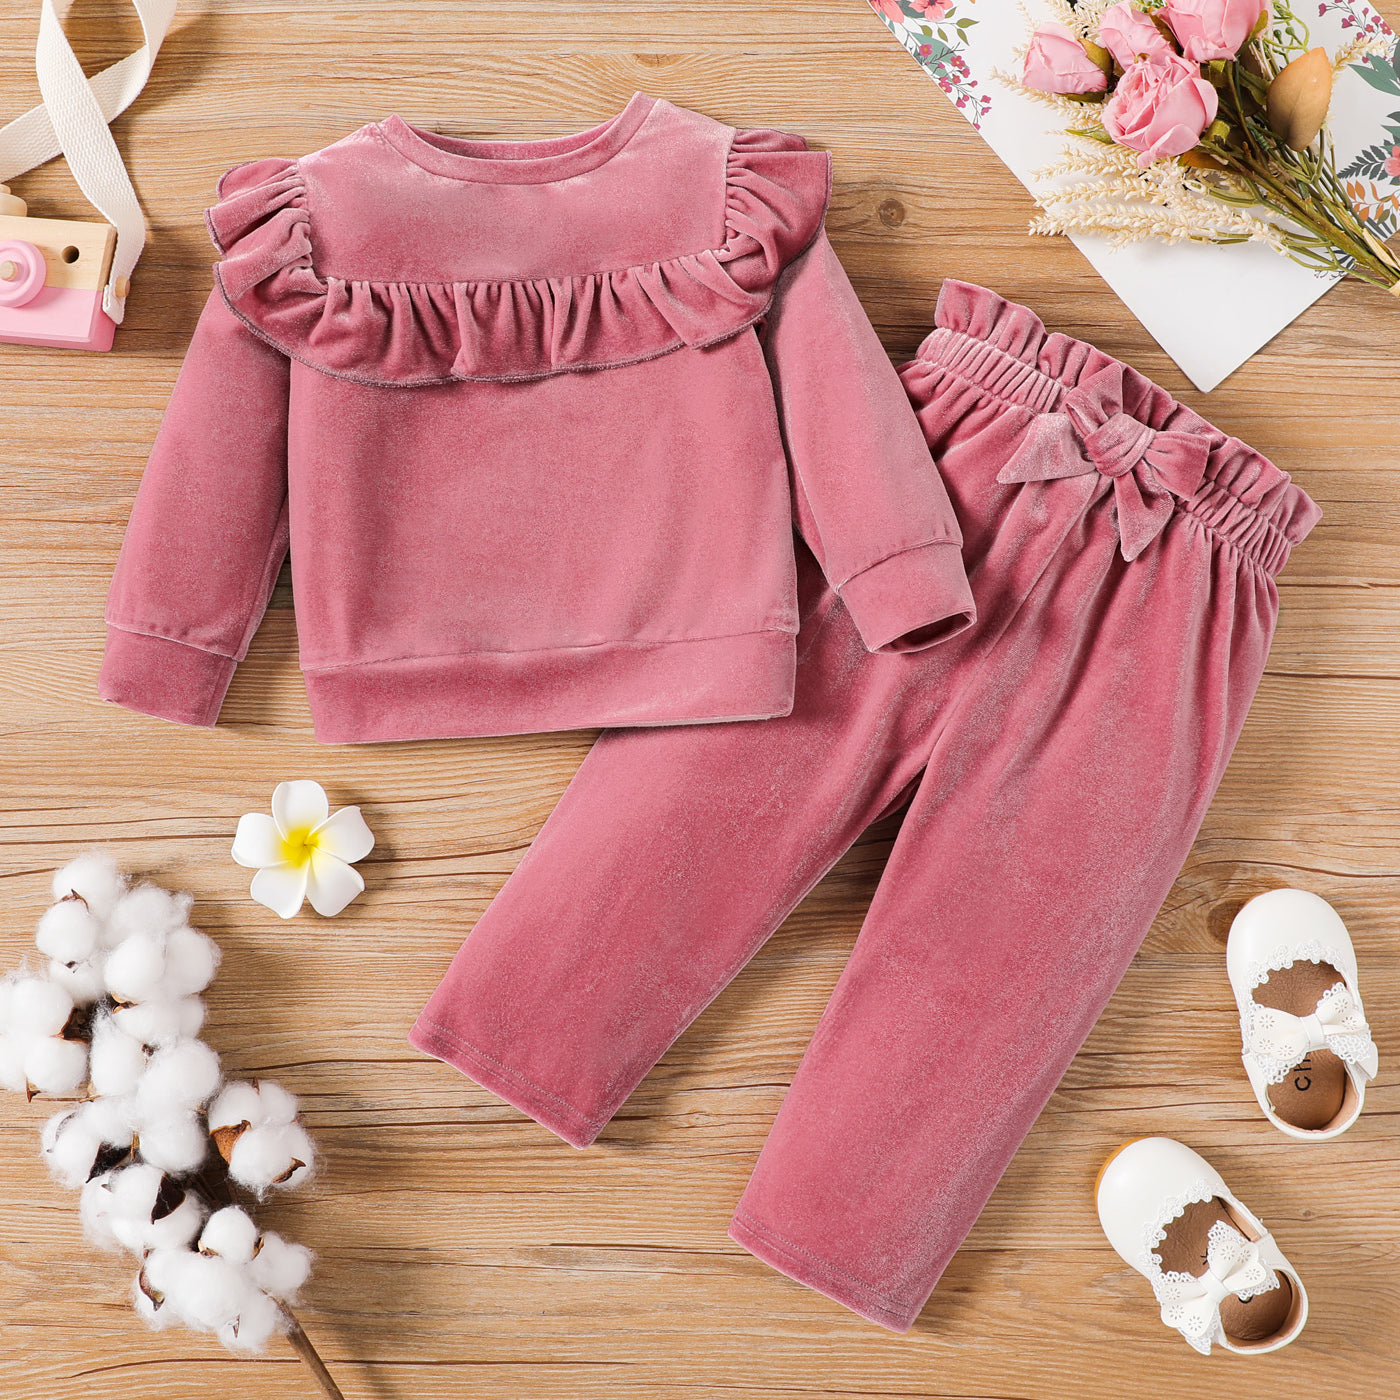 2pcs Baby Girl Pink Velvet Ruffle Trim Long-sleeve Top and Bow Front Pants Set